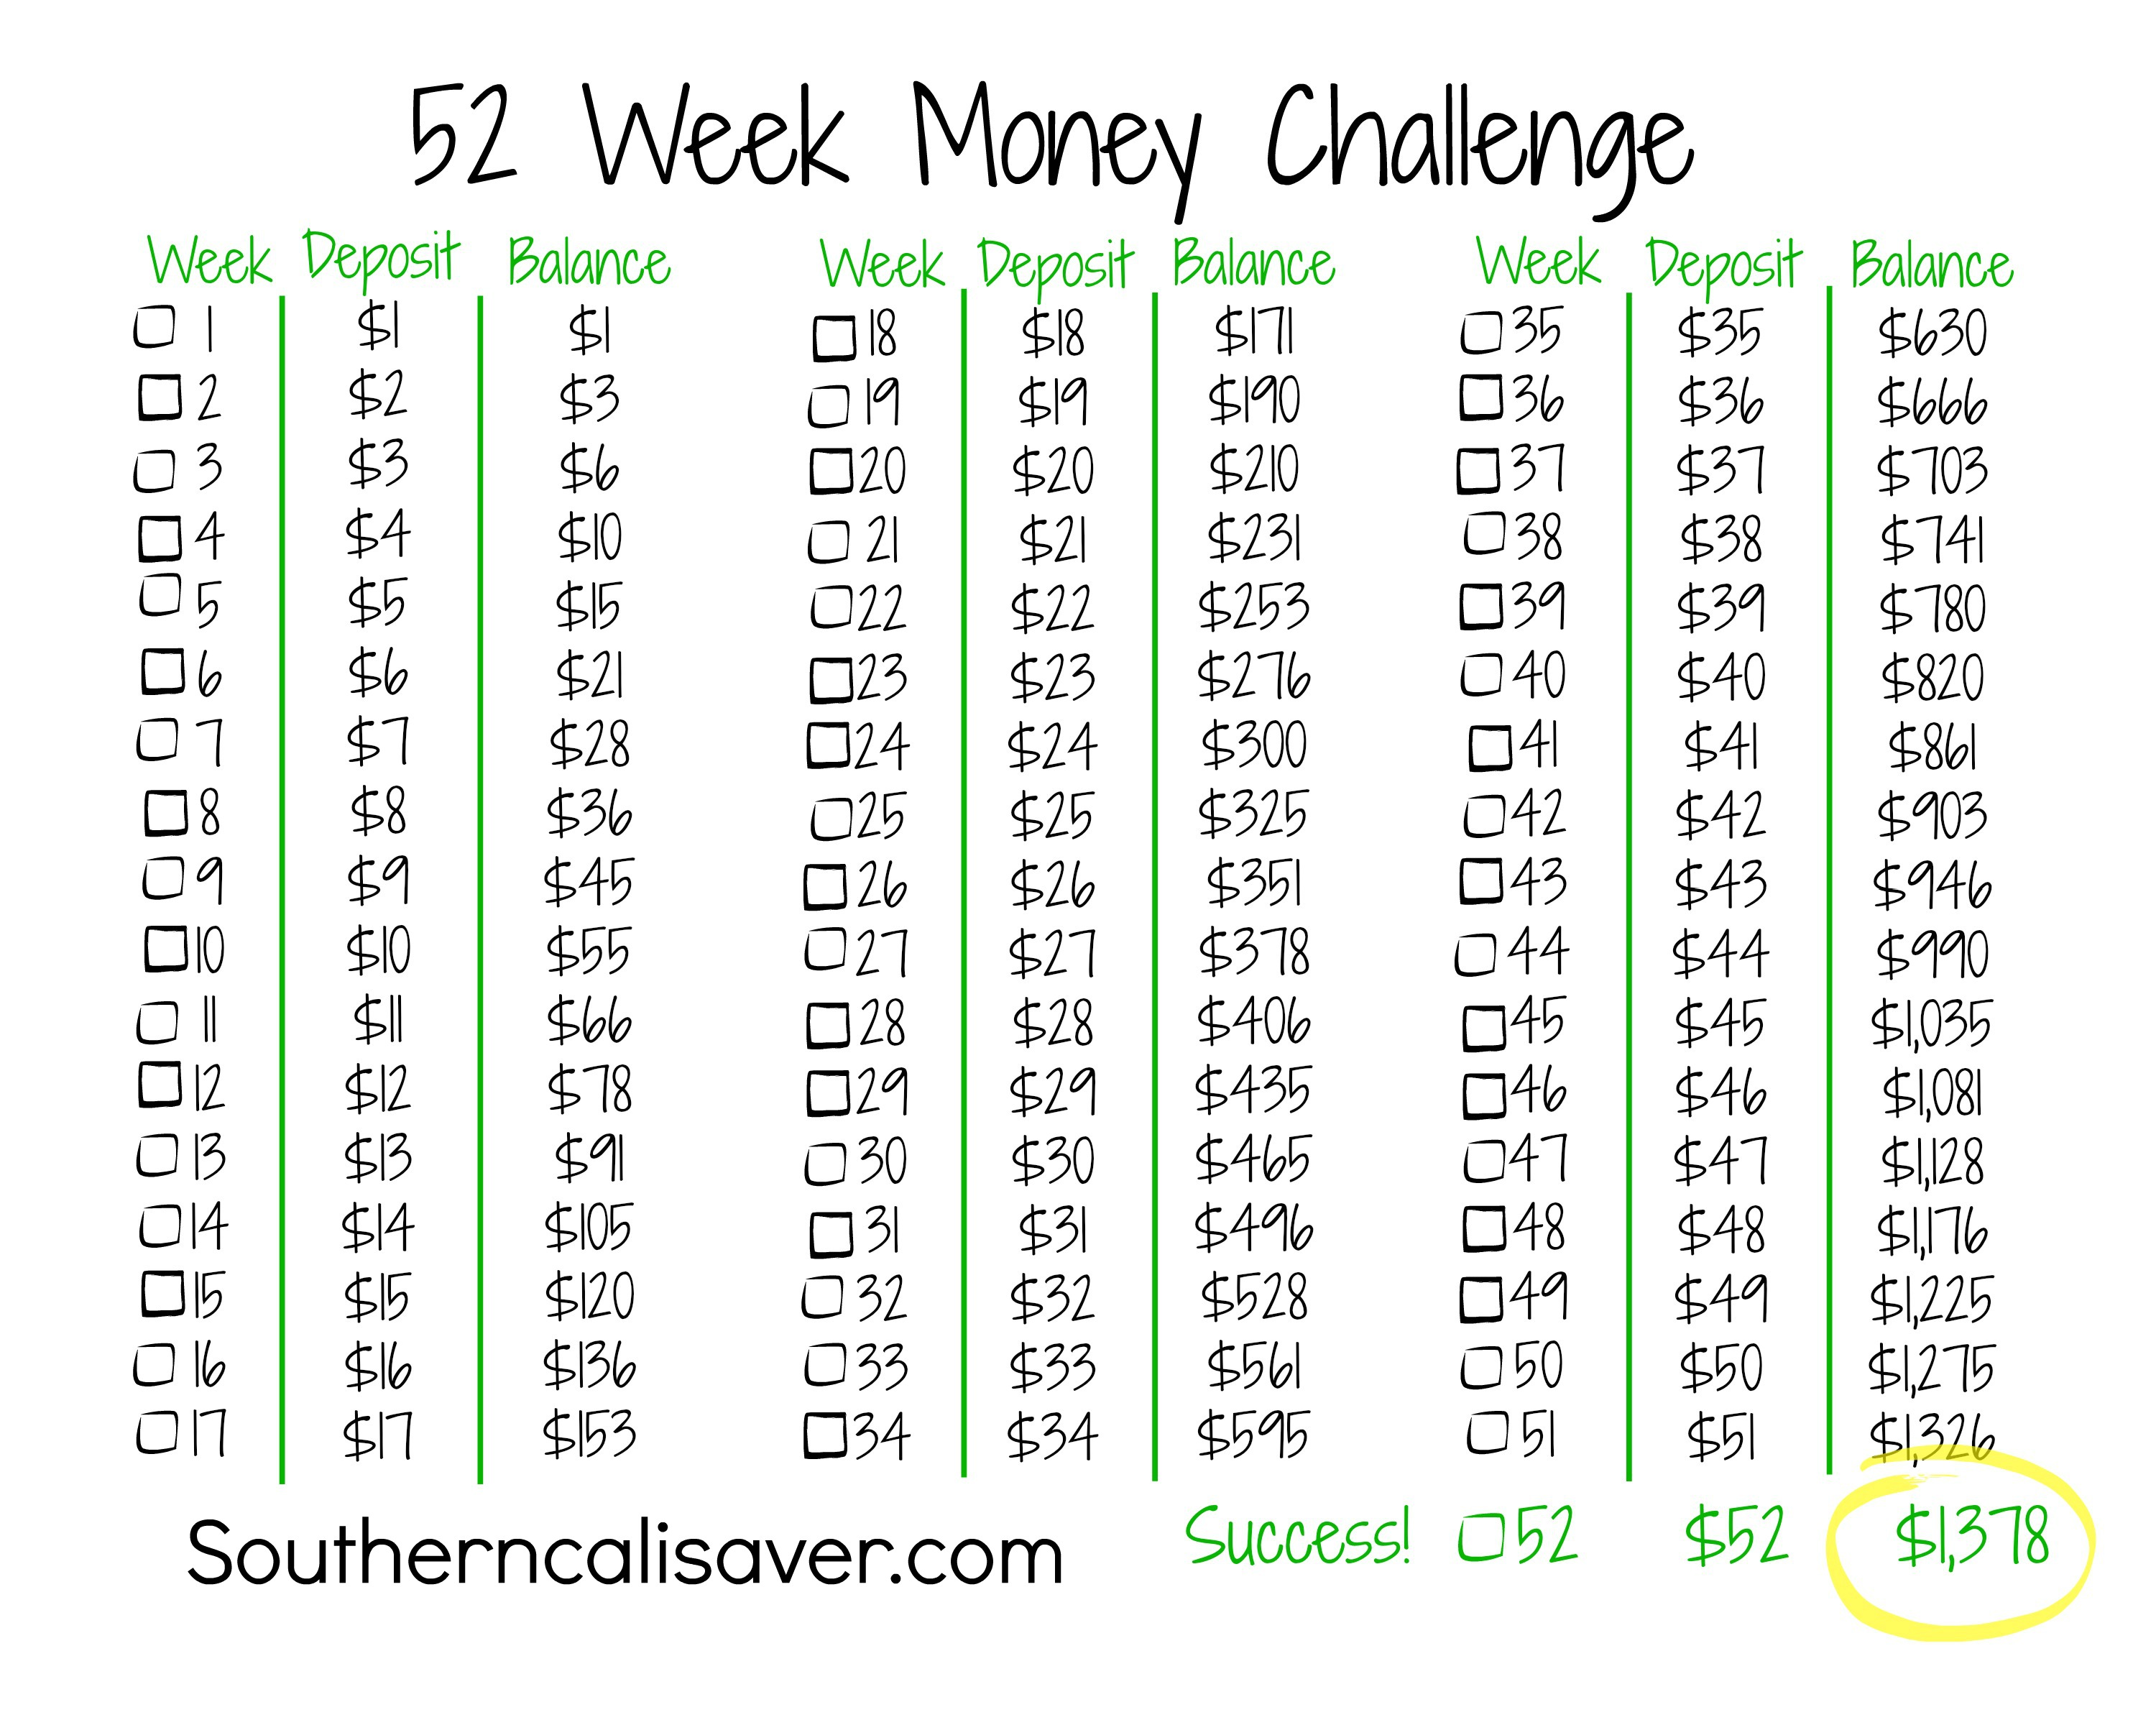 5-different-ways-to-save-1-400-doing-the-52-week-savings-challenge